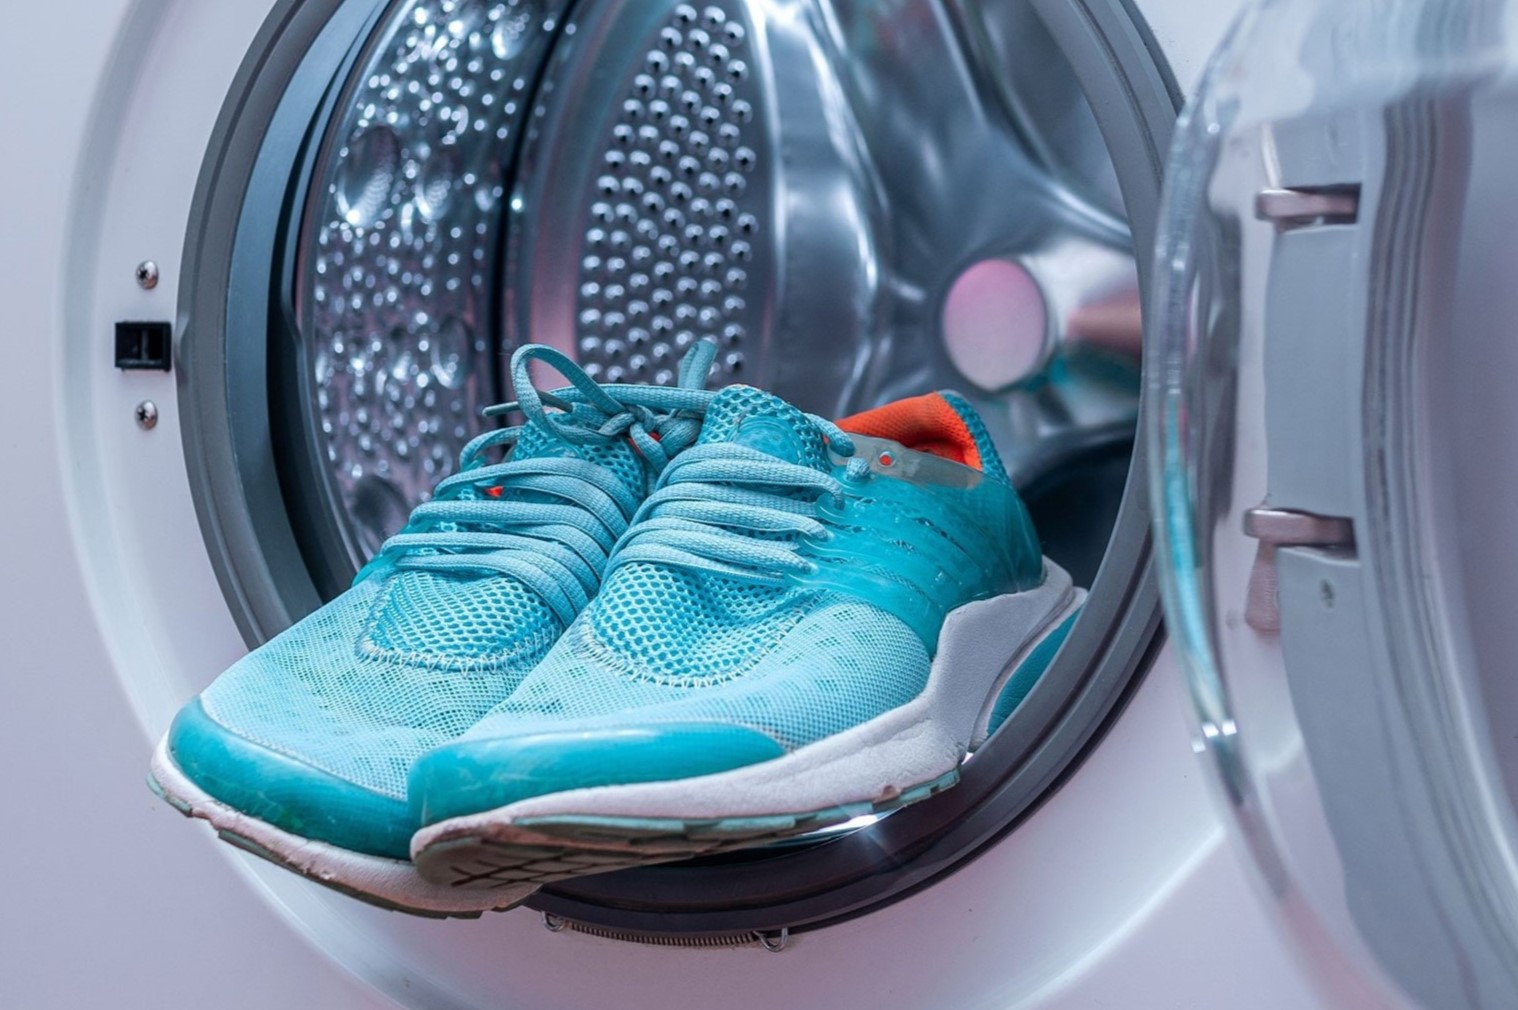 How To Wash Shoes In The Samsung Washing Machine